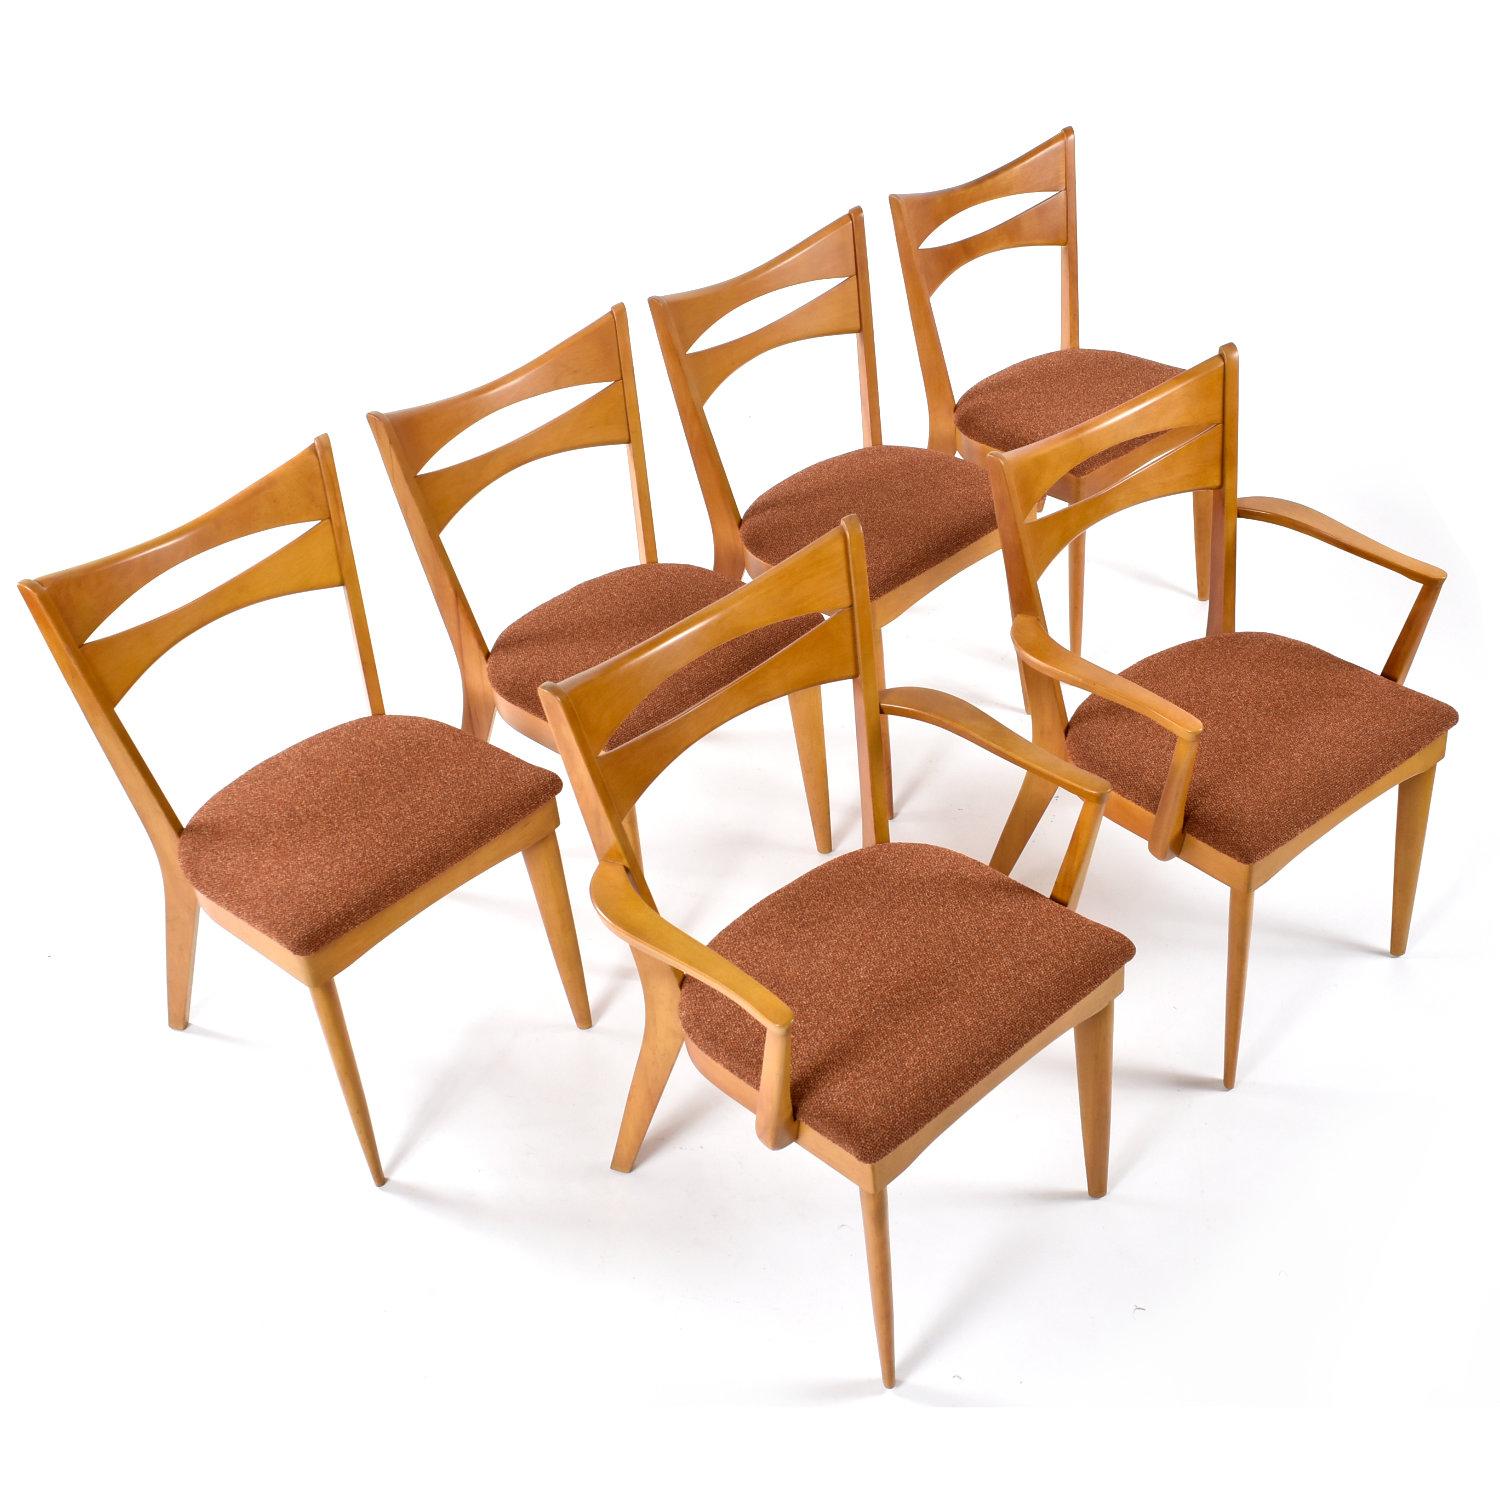 Mid-20th Century Heywood Wakefield Dining Table Set with '6' M1553 Cat’s Eye Dining Chairs